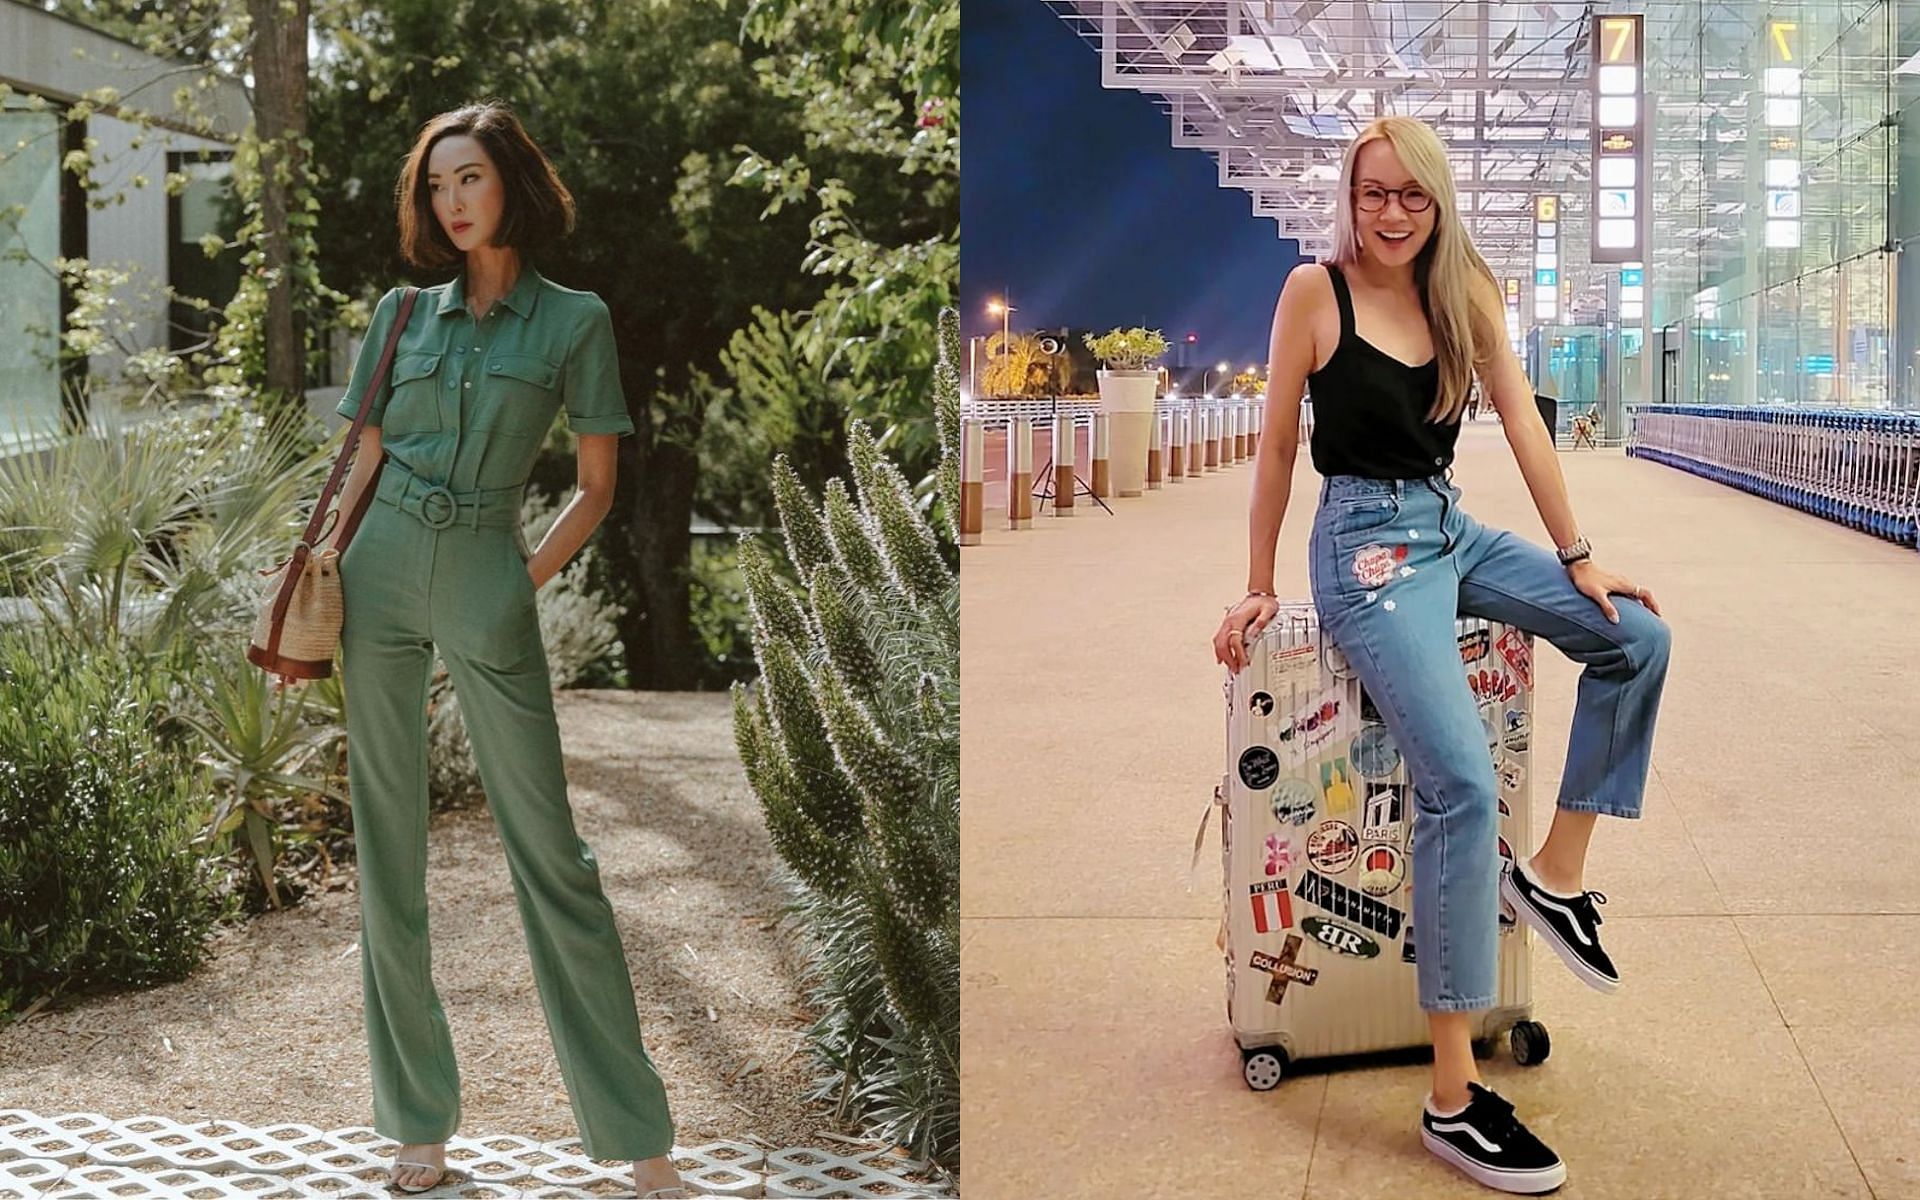 Try These Celeb And Influencer-Approved Airport Outfits On Your Next Vacay